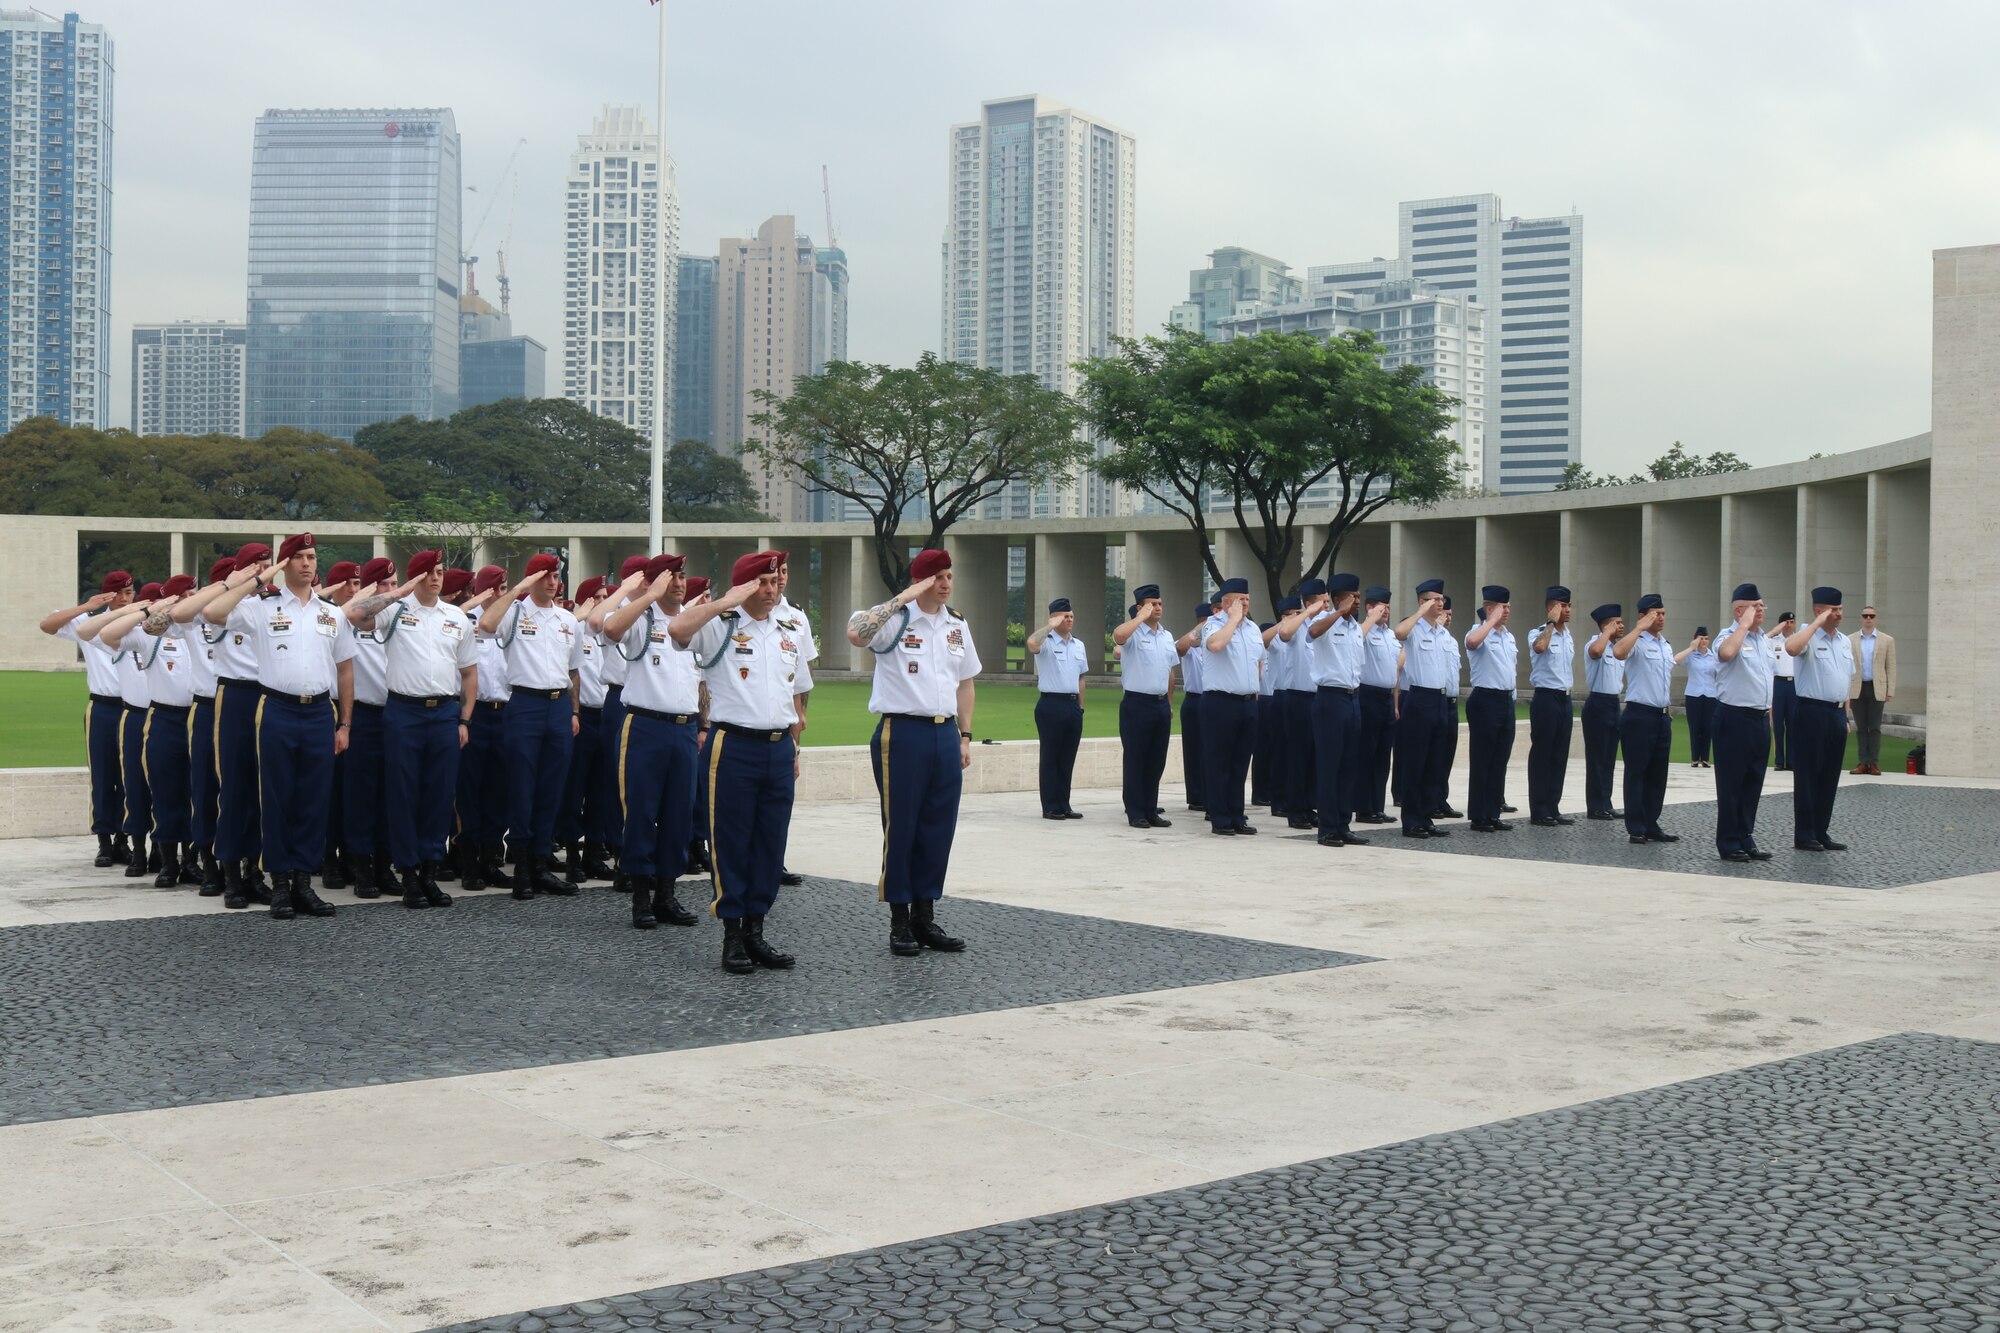 U.S. service members from the 317th Airlift Wing from Dyess Air Force Base, Texas, and the 2nd Battalion, 503rd Infantry Regiment in Vicenza, Italy, issue a salute during the playing of the U.S. national anthem in the 75th anniversary of the retaking of Corregidor Island ceremony at the Manila American Cemetery in Manila, Philippines, Feb. 17, 2020.